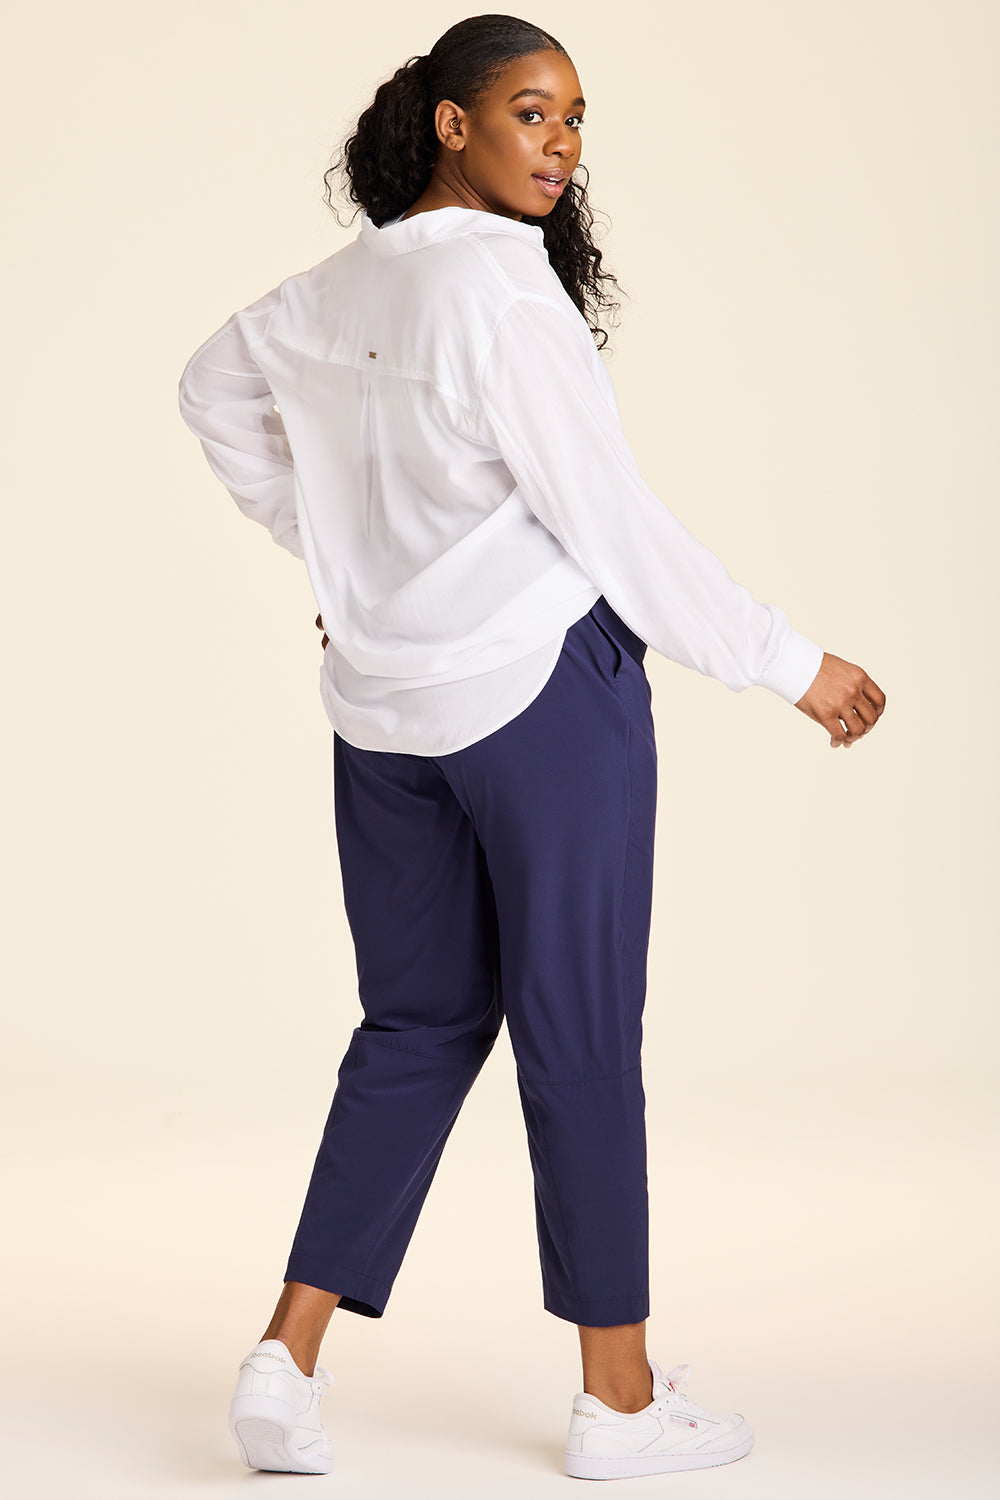 Commuter Pant - Navy Elevated Pants, High Waisted Pants Women